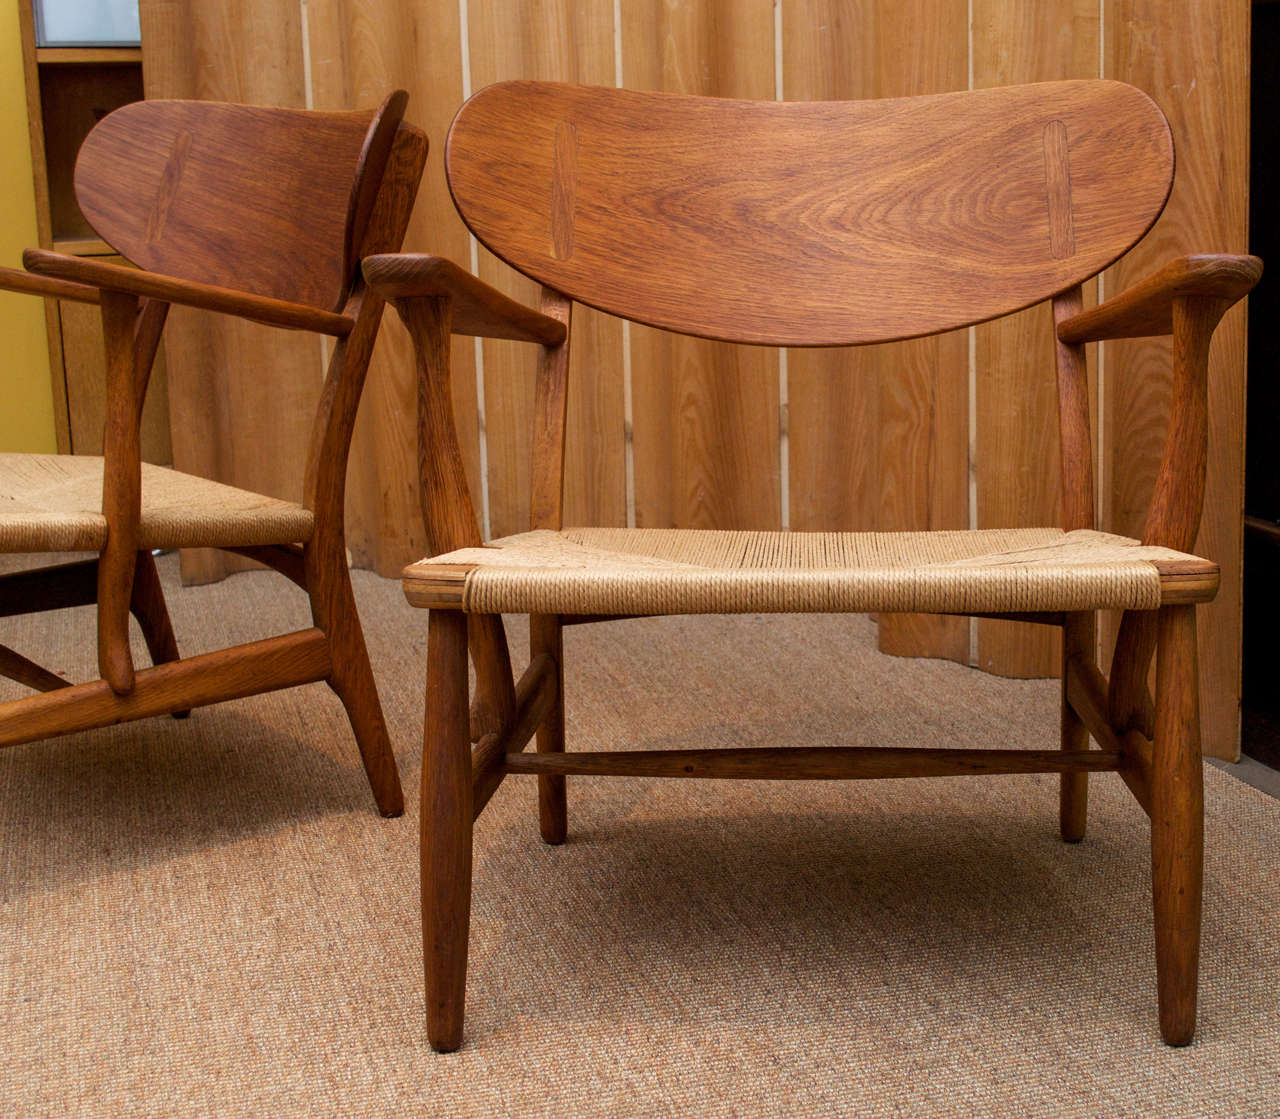 Wonderful pair of shell back chairs by Hans Wegner. Original seat cording in great condition.